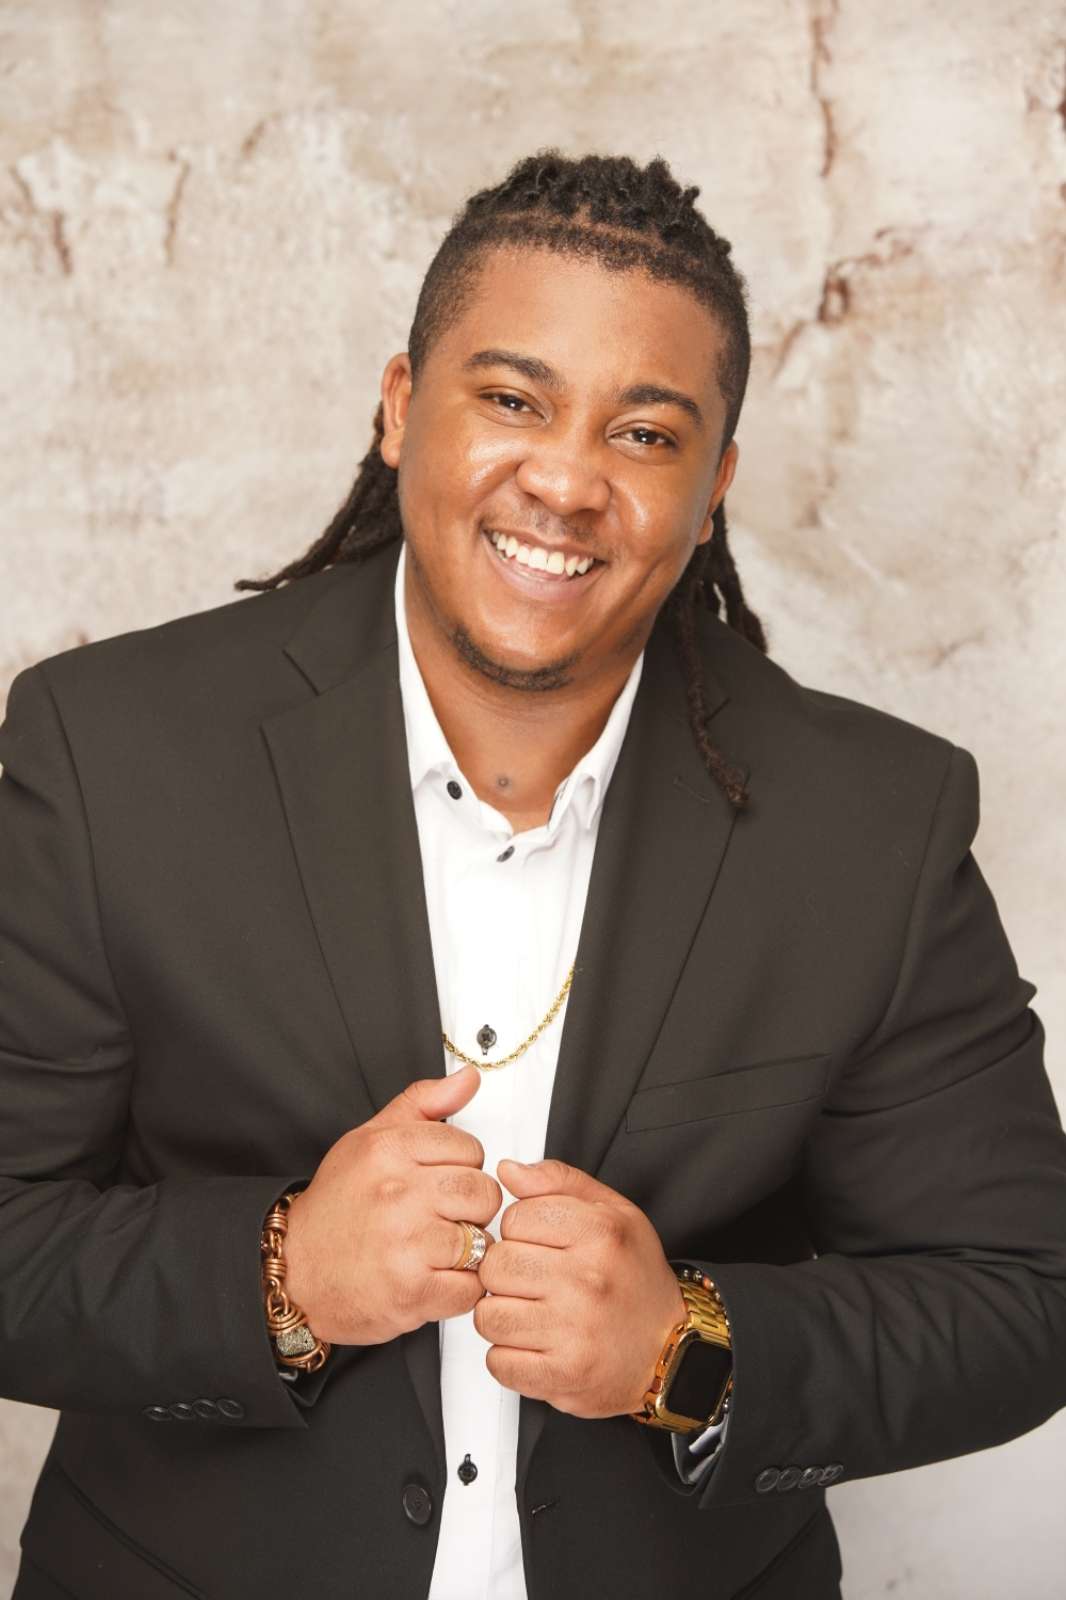 joshua-rogers-hits-#1-on-bds-gospel-airplay-chart-for-a-2nd-week-with-“still-gon-trust”